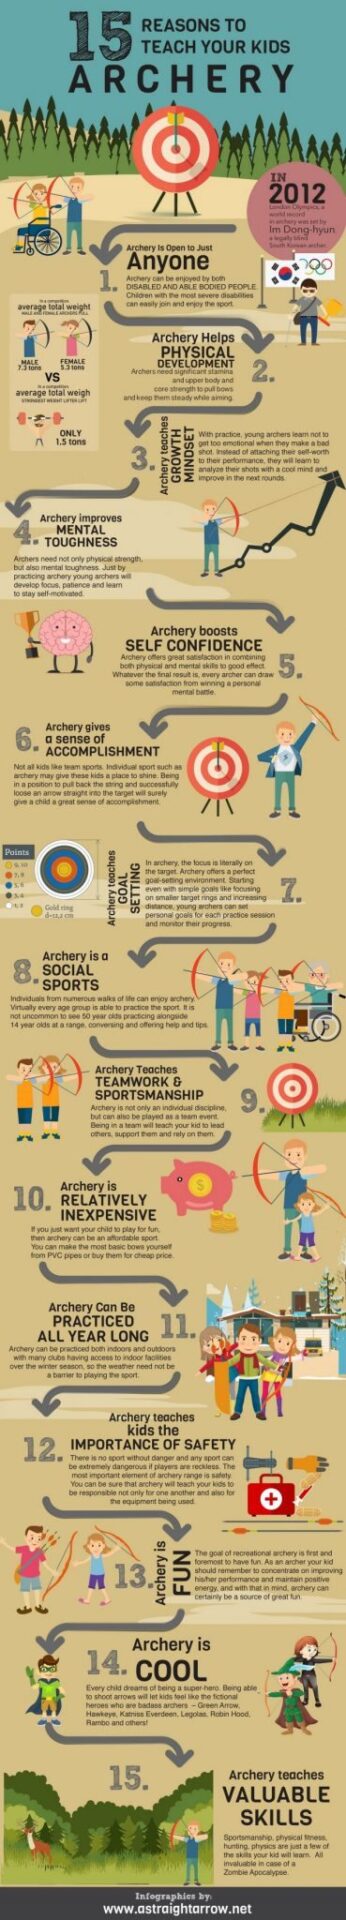 15 reasons to teach your kids archery infographic